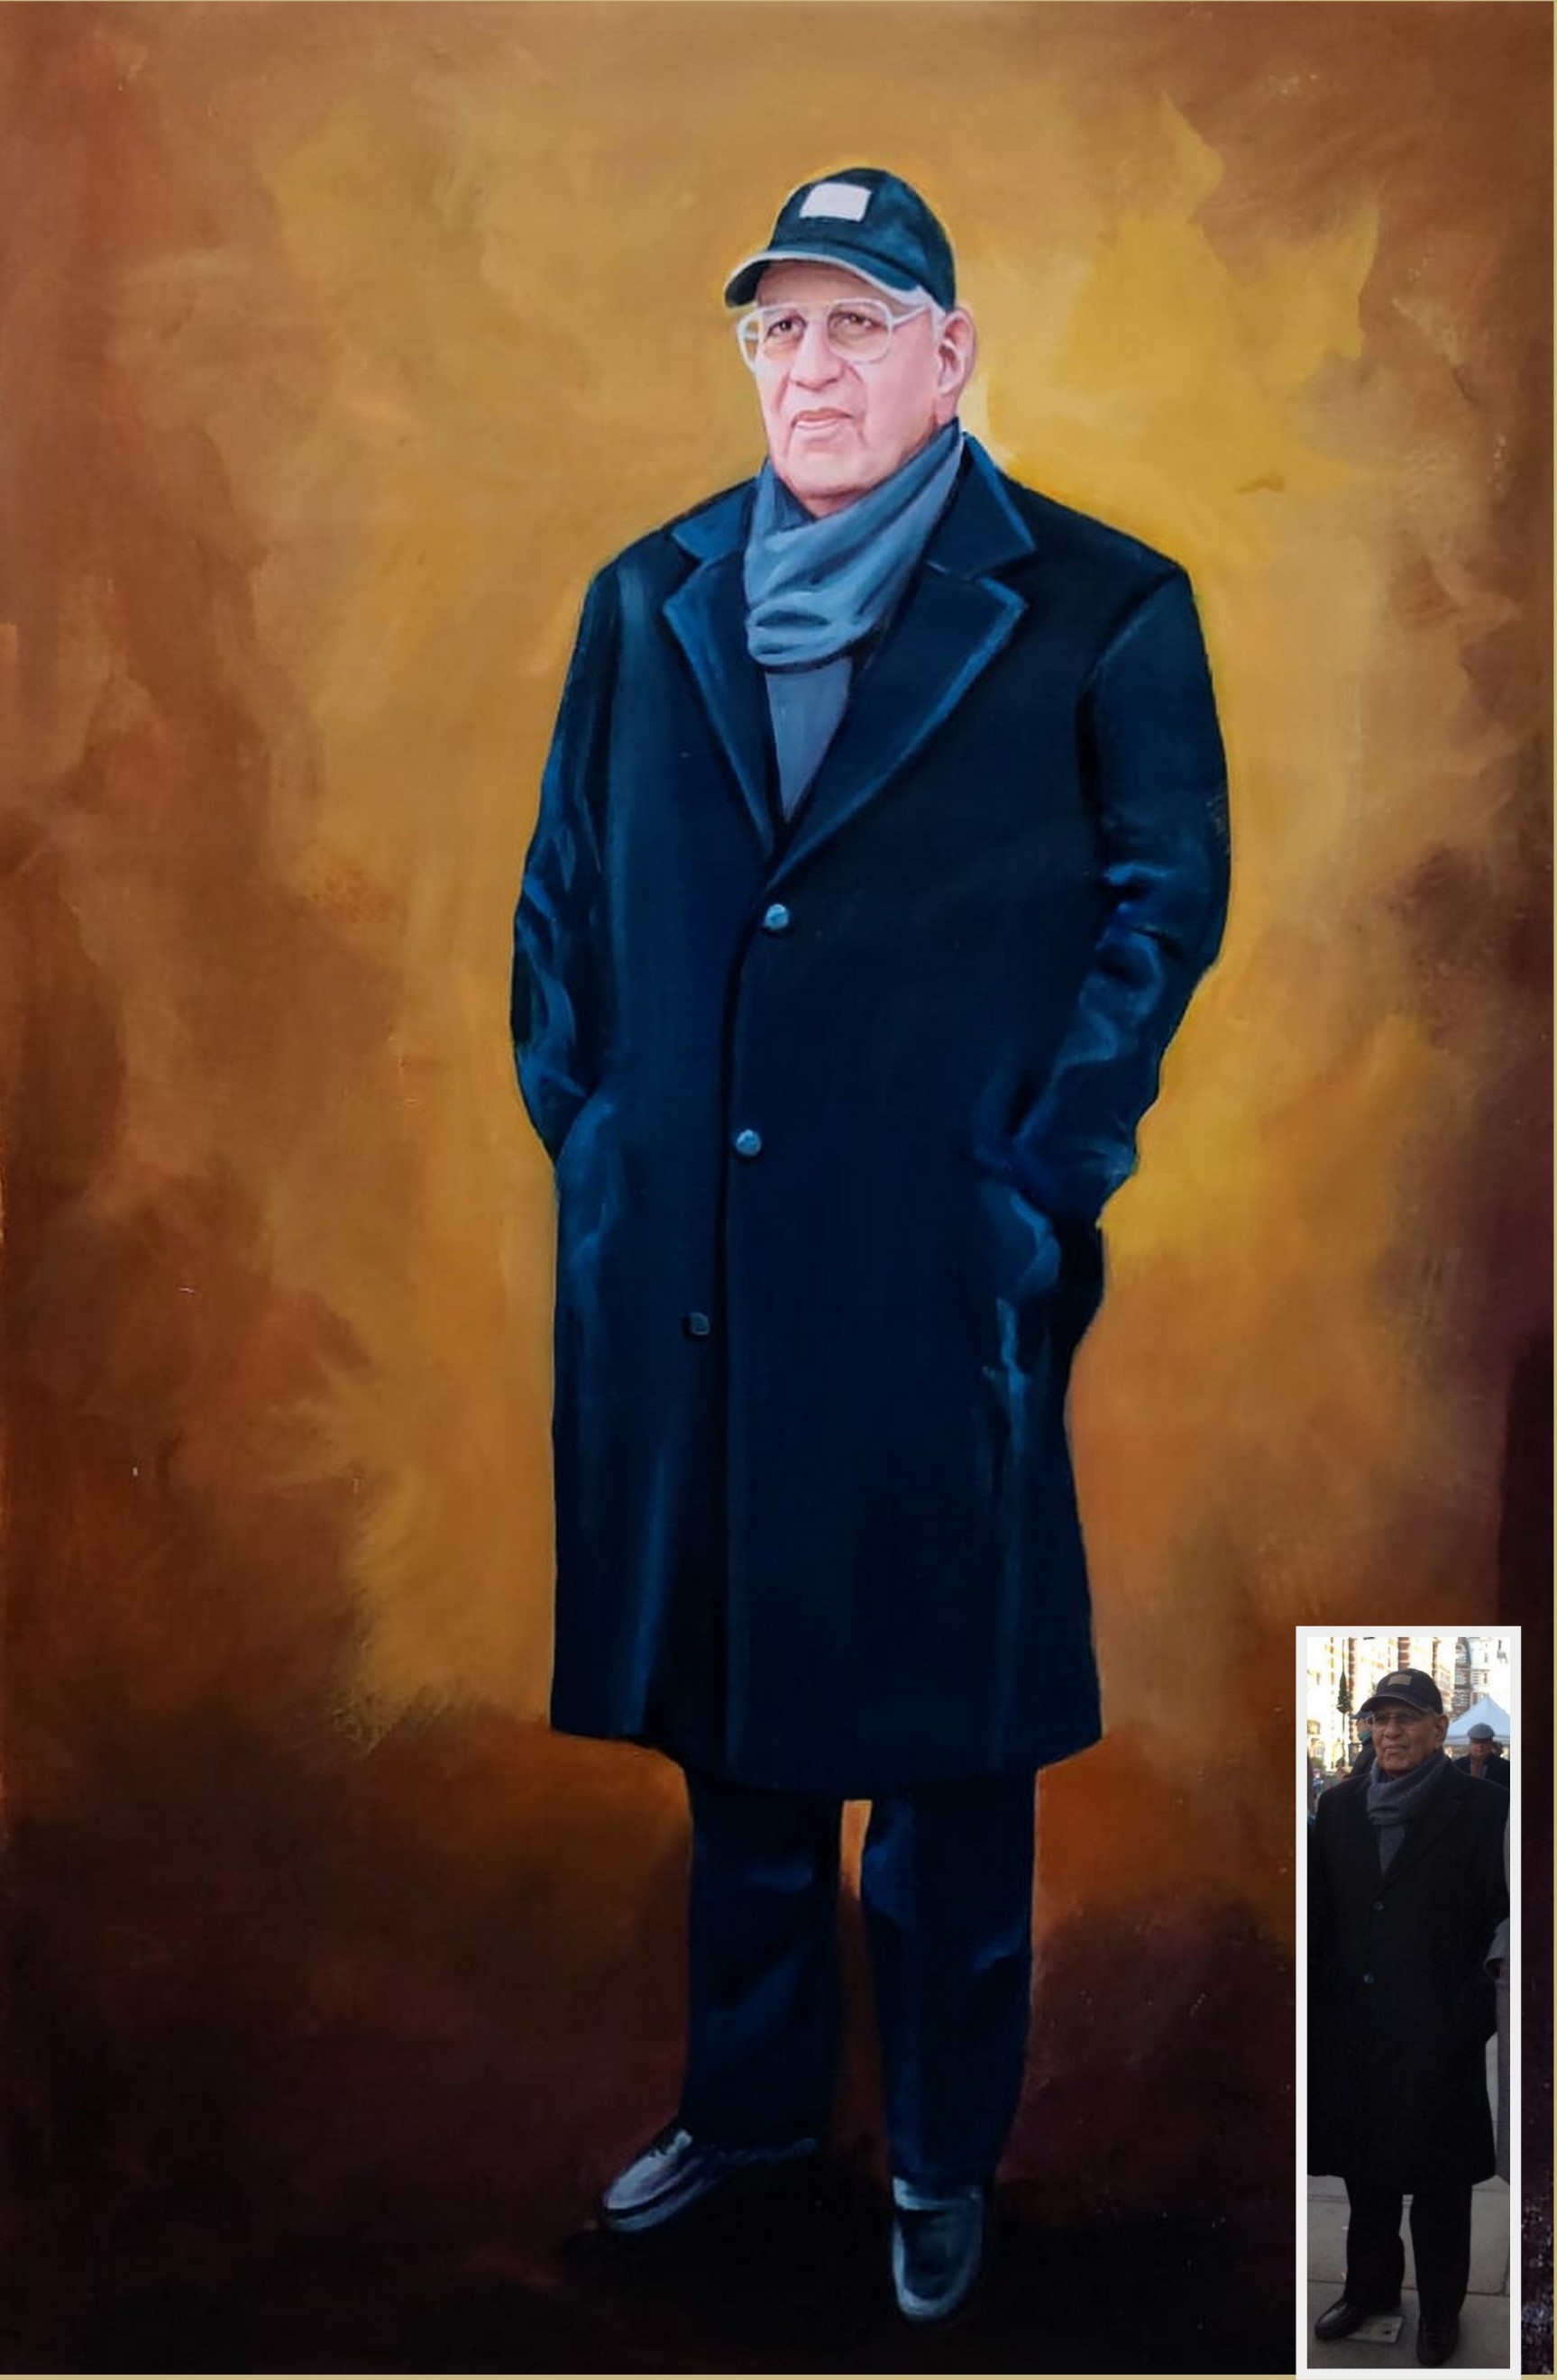 deceased loved one oil painting from photo, memorial oil painting of father from photo, portrait art